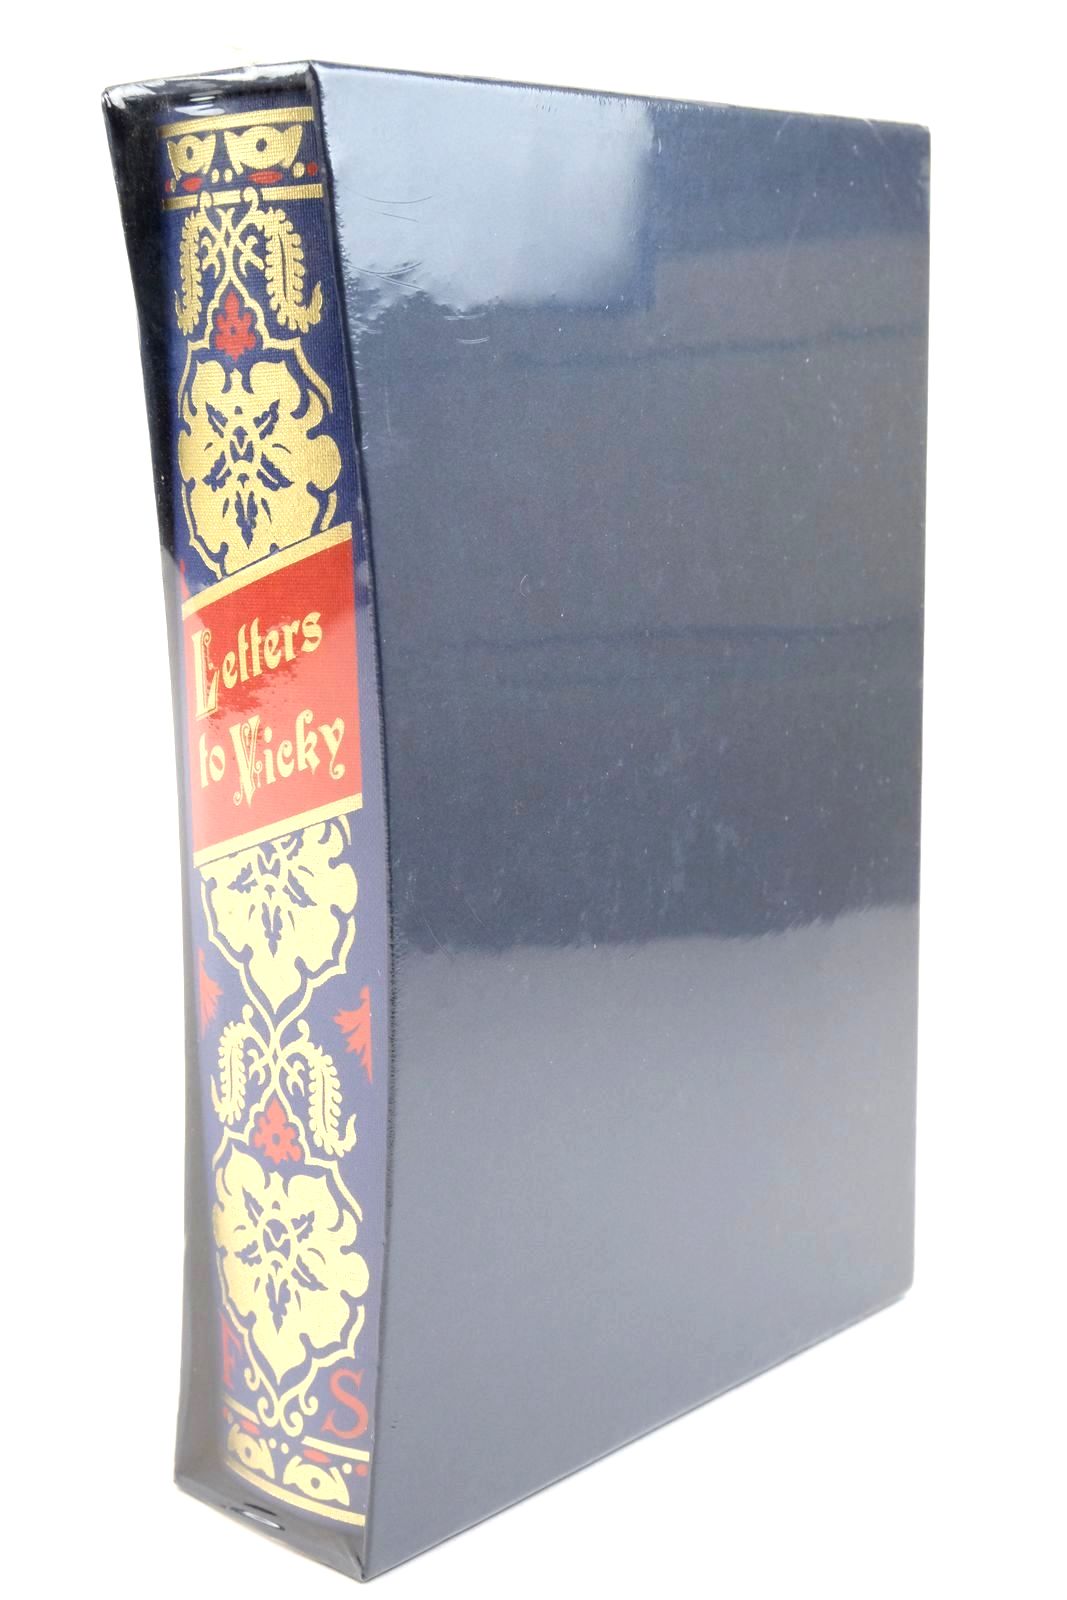 Photo of LETTERS TO VICKY written by Victoria, Queen
Roberts, Andrew published by Folio Society (STOCK CODE: 1321941)  for sale by Stella & Rose's Books